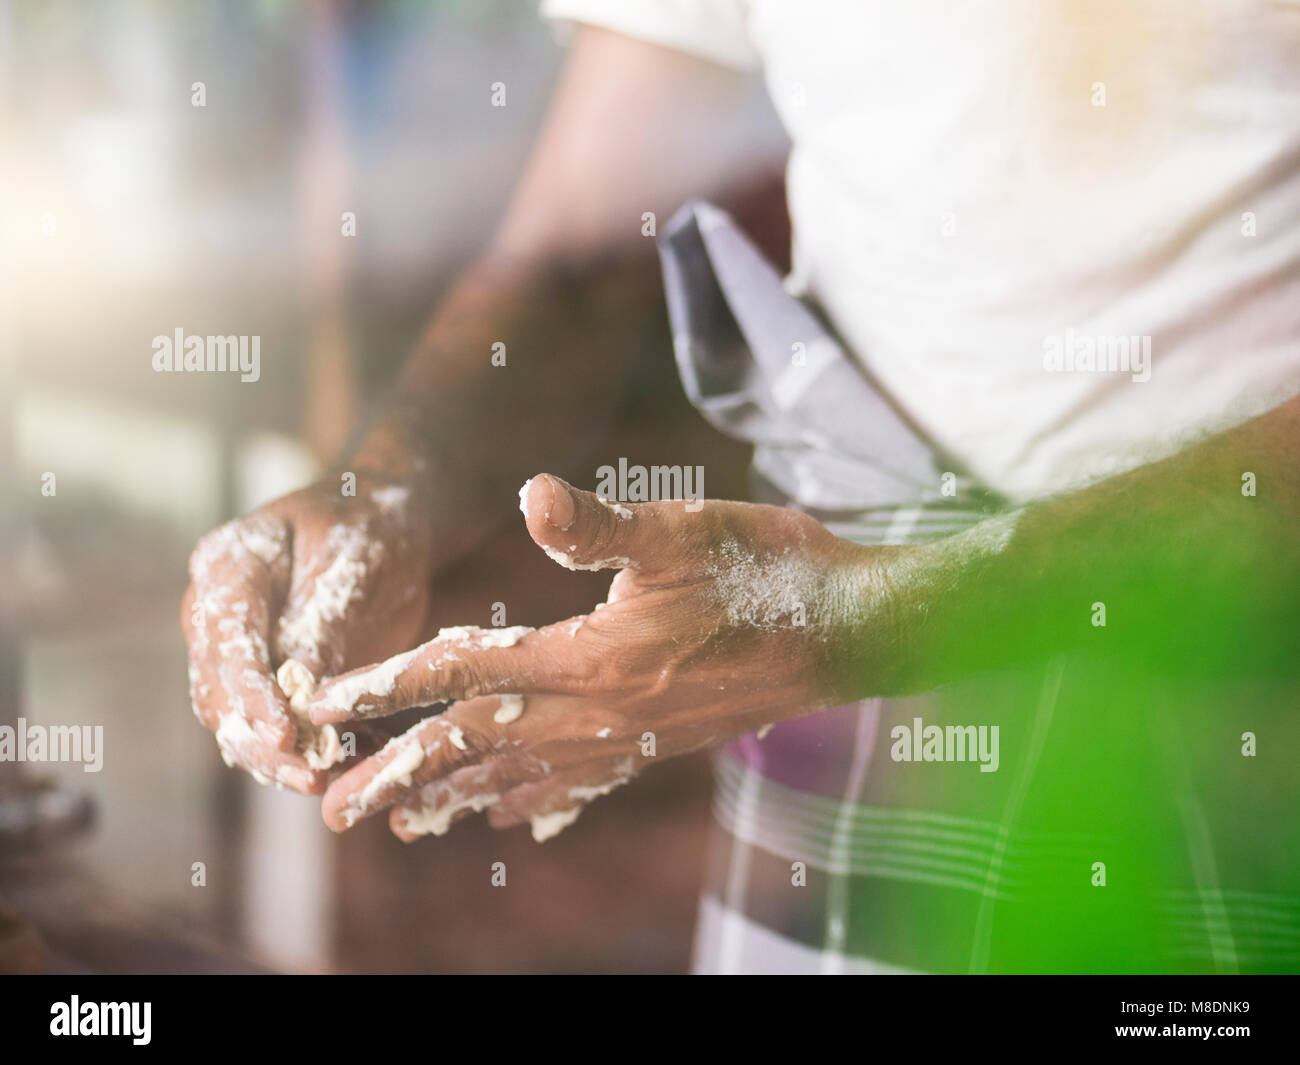 Man removing roti dough from fingers Stock Photo